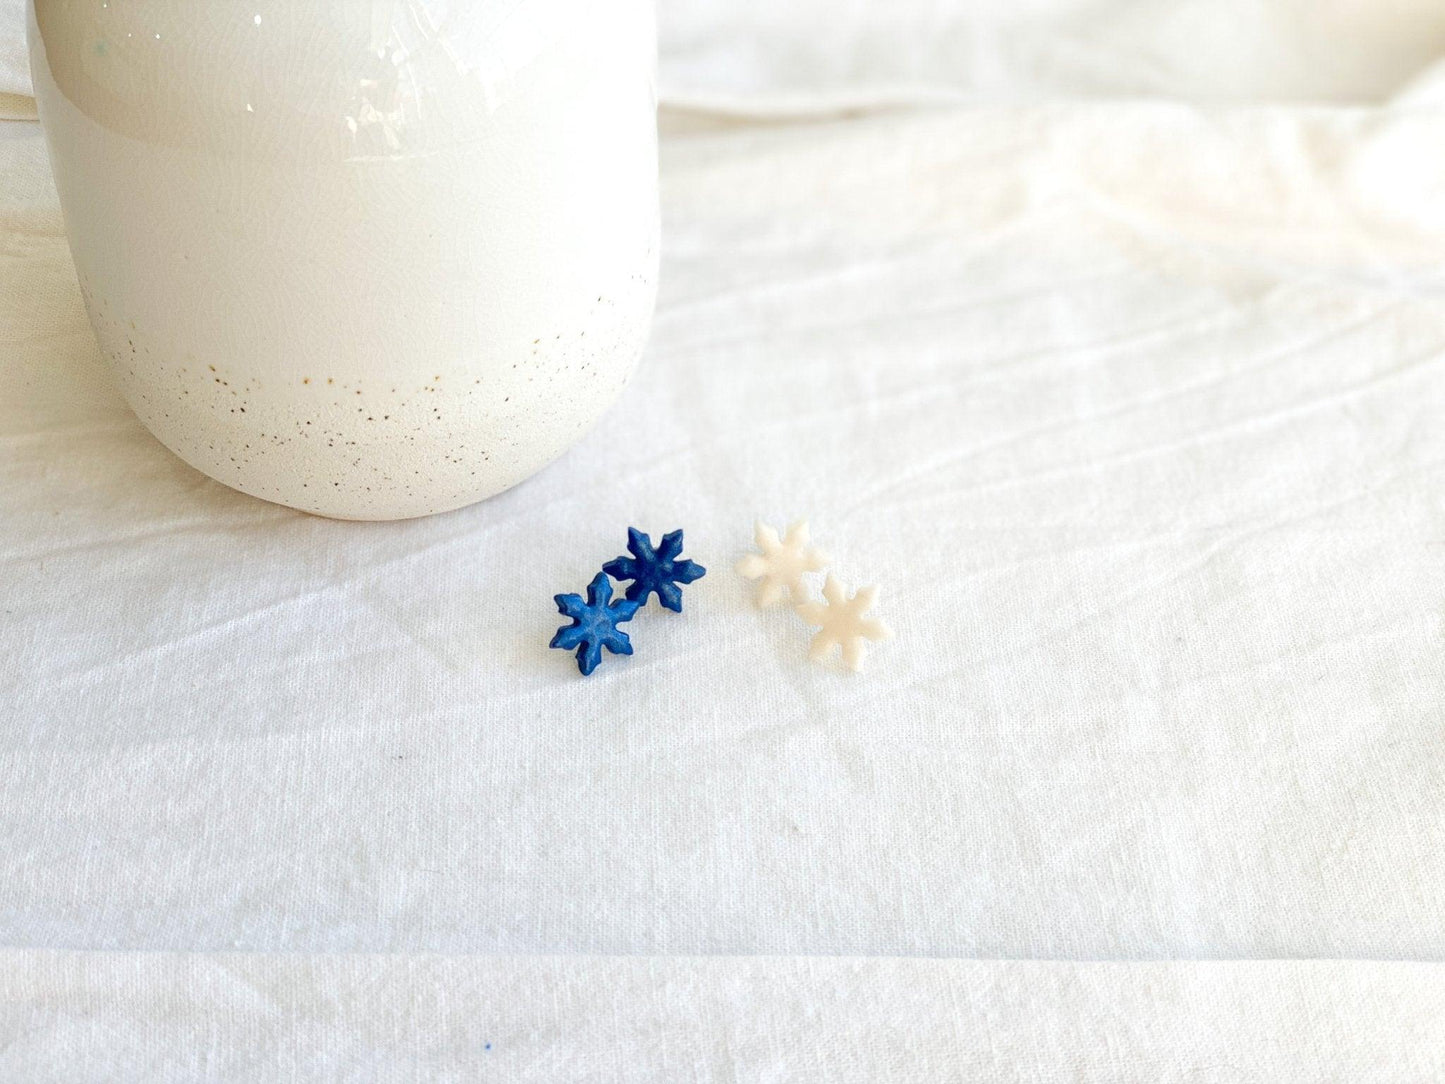 Handmade Snowflake Stud Earrings with Surgical Steel Posts in Blue and White on White Linen Cloth